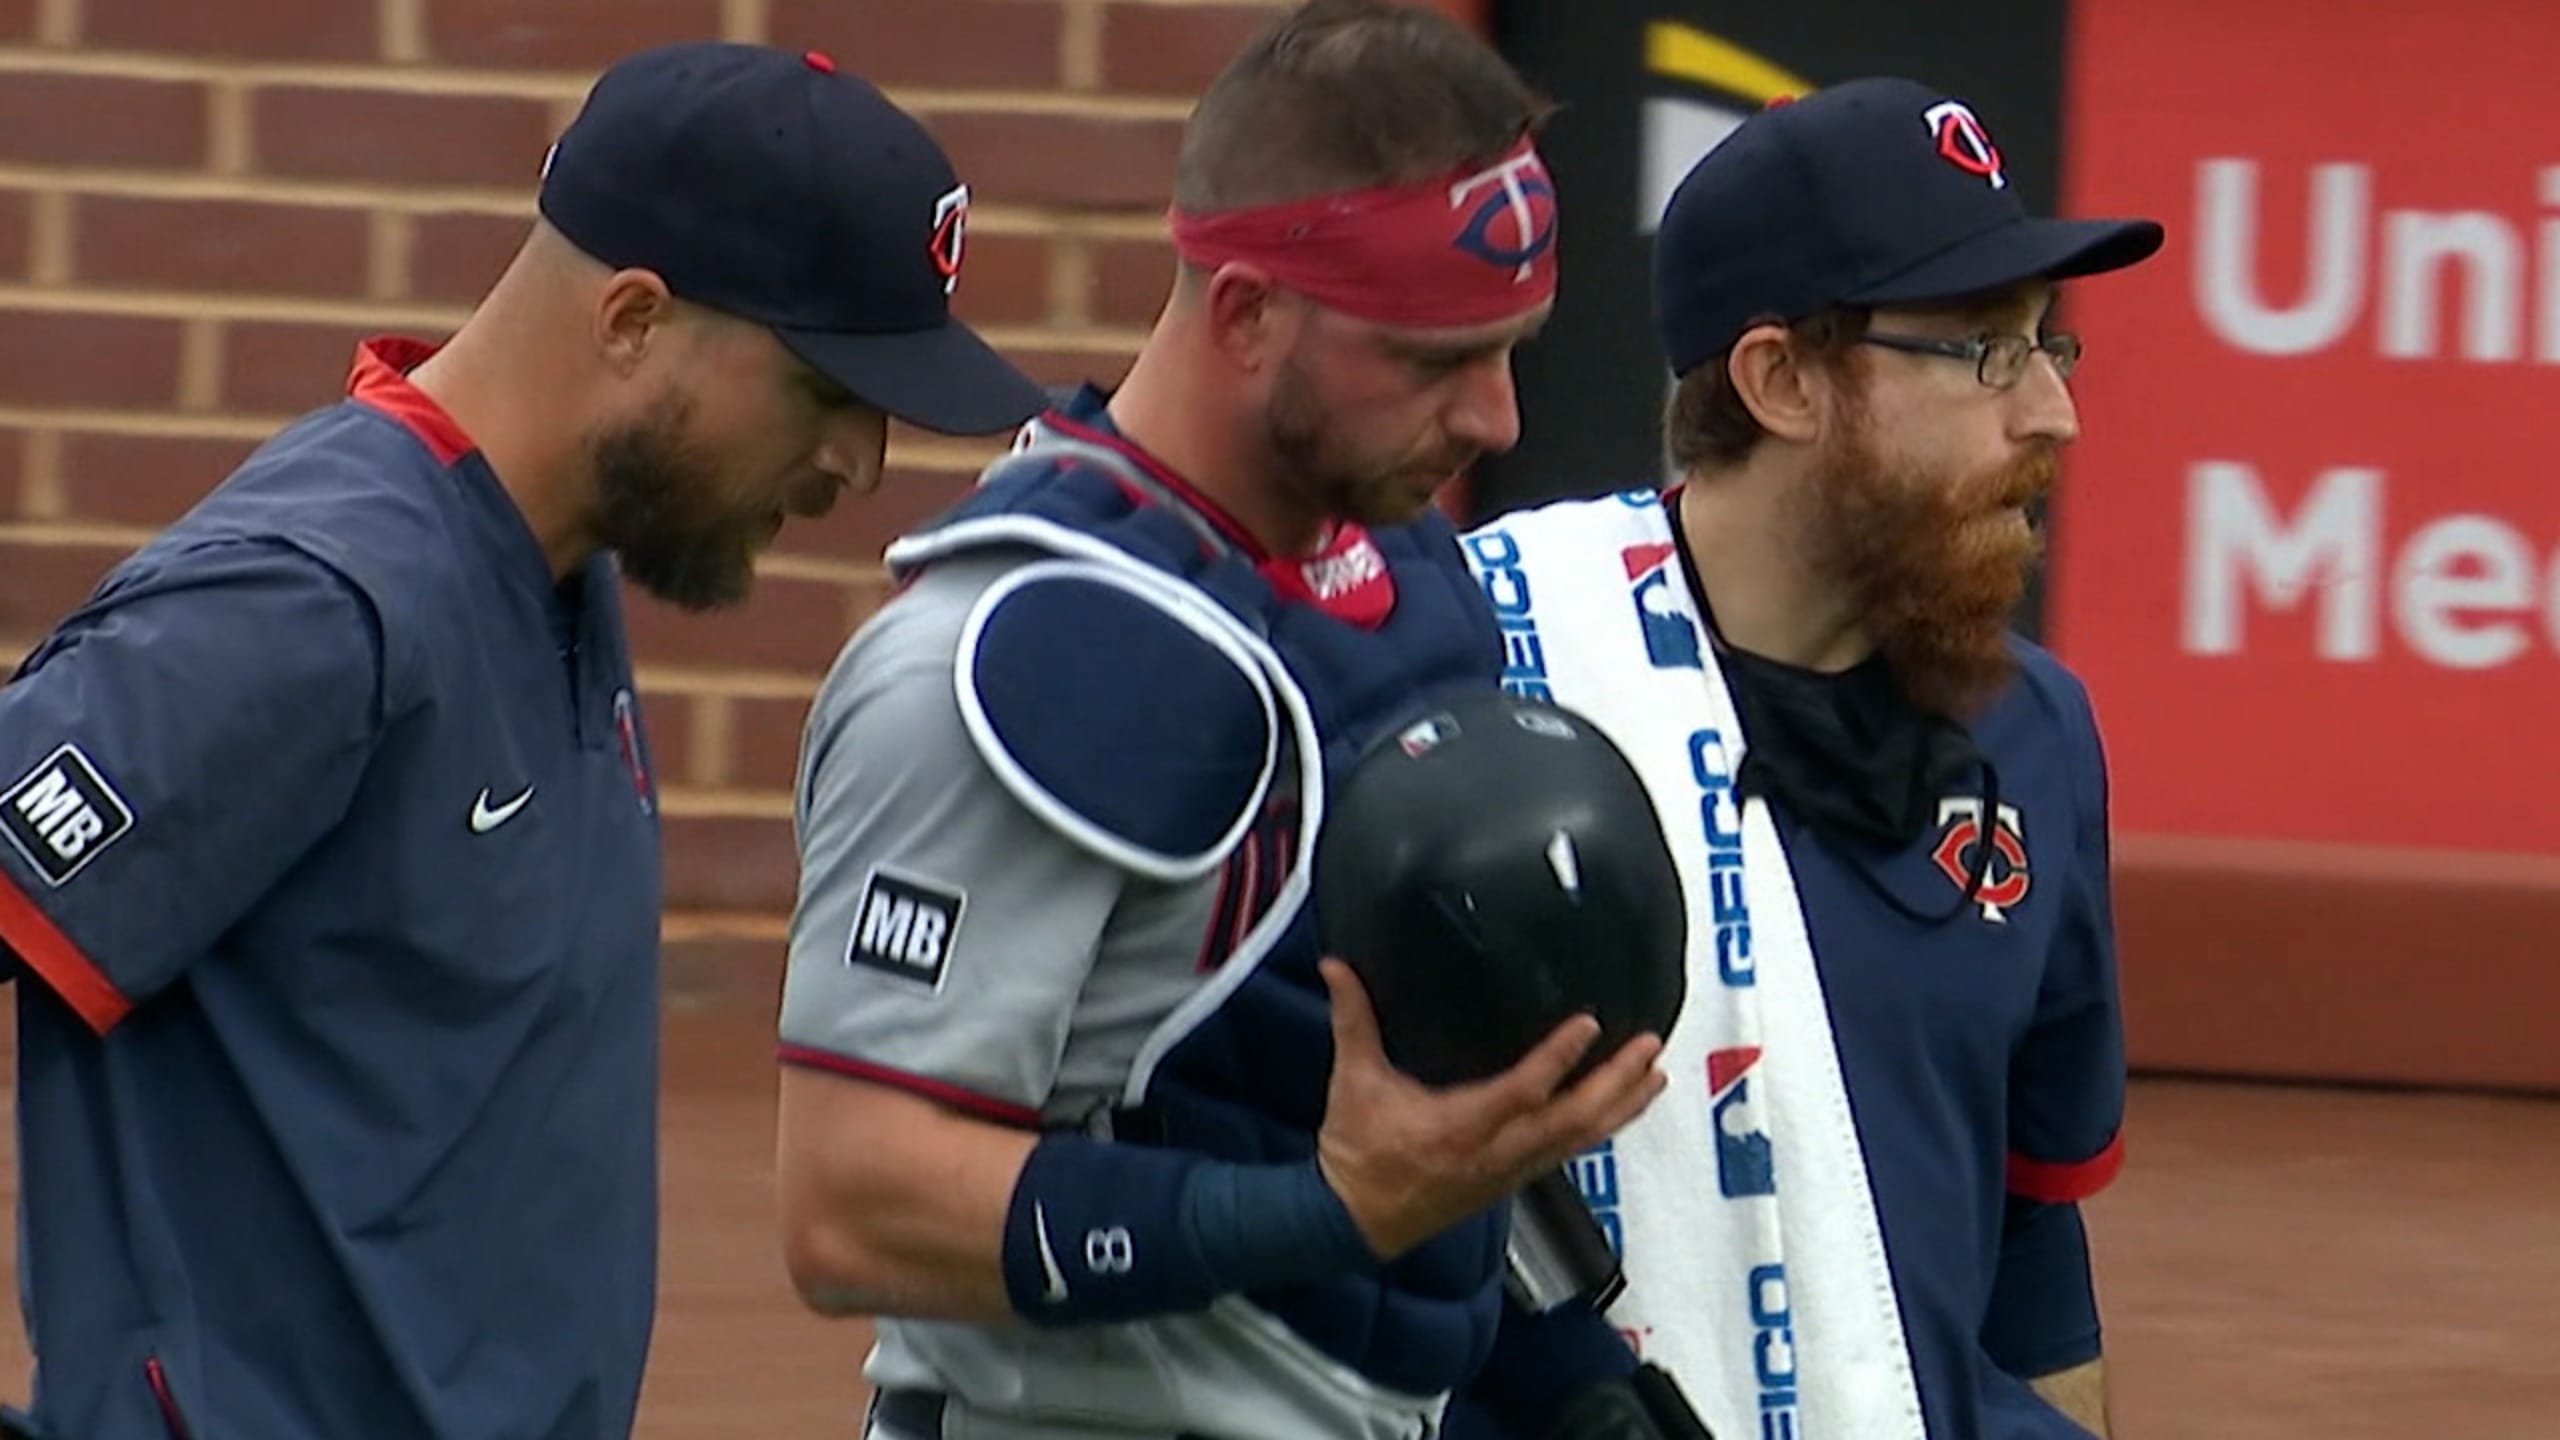 Twins catcher Mitch Garver has surgery after taking foul tip off groin